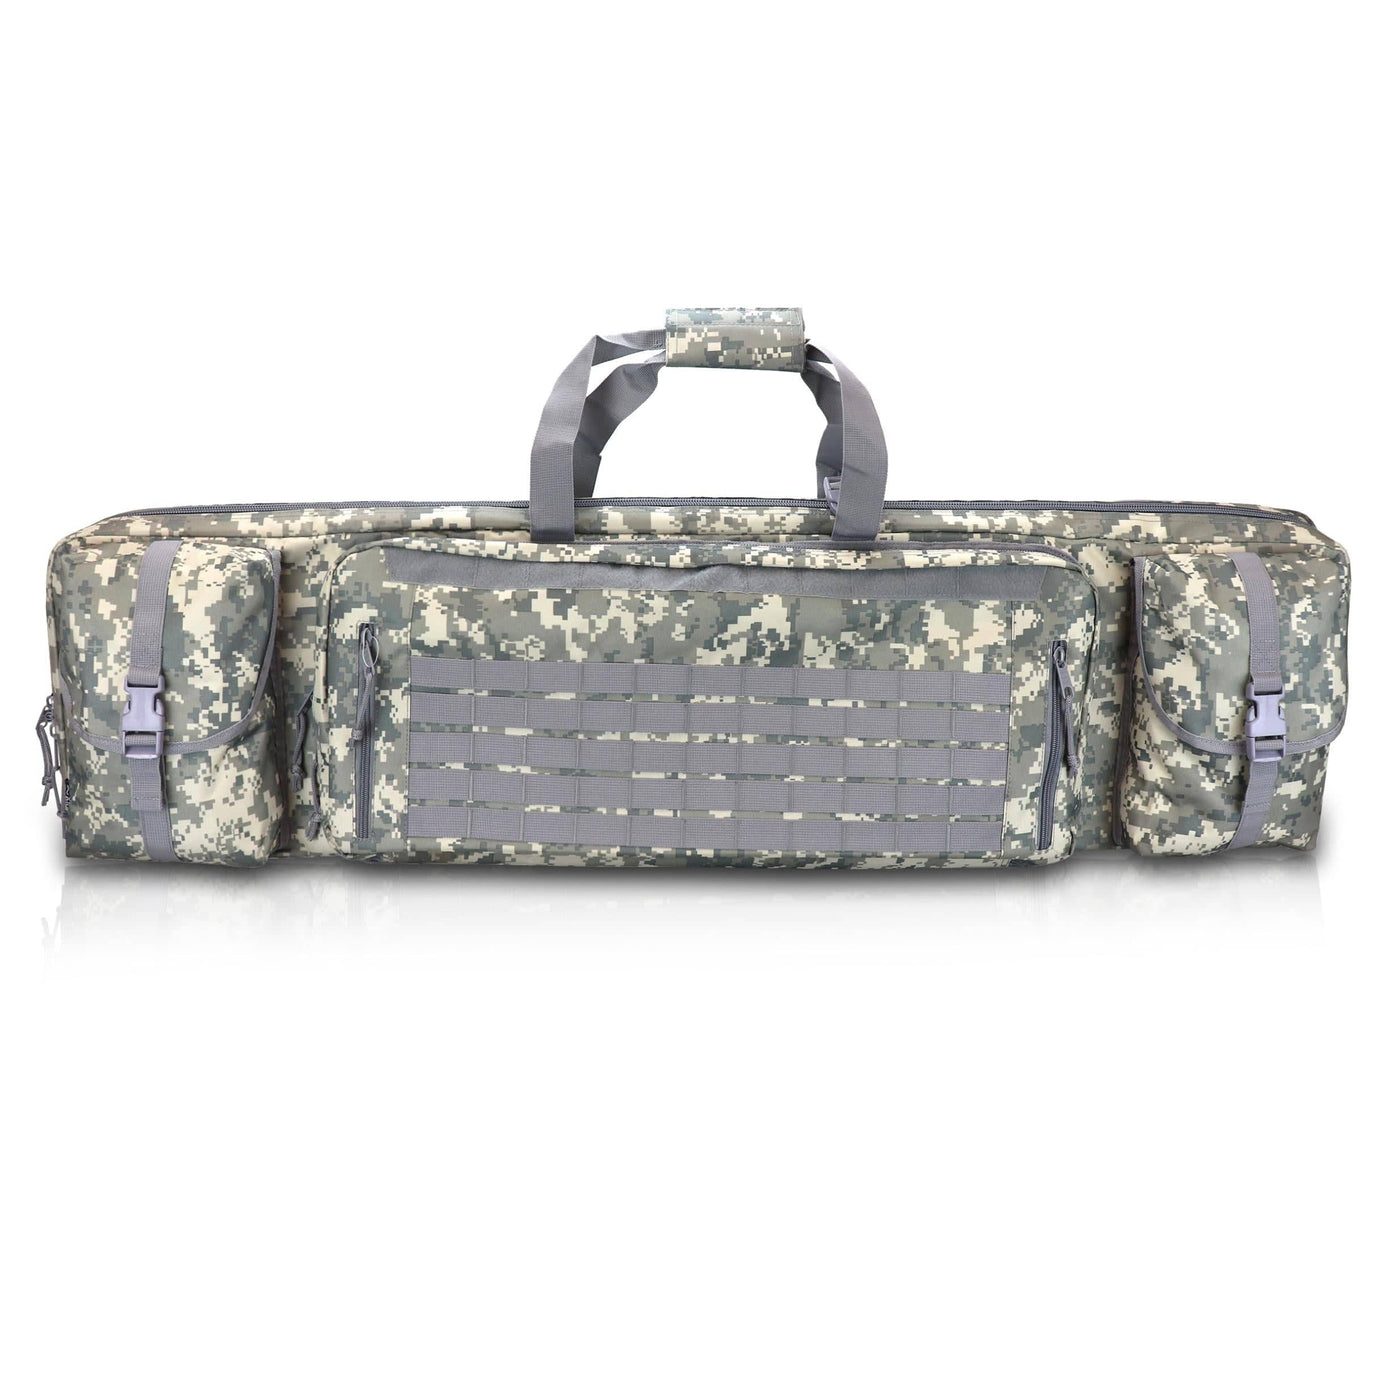 Osage River Osage River 36 in Double Rifle Case Digital Camo Shooting